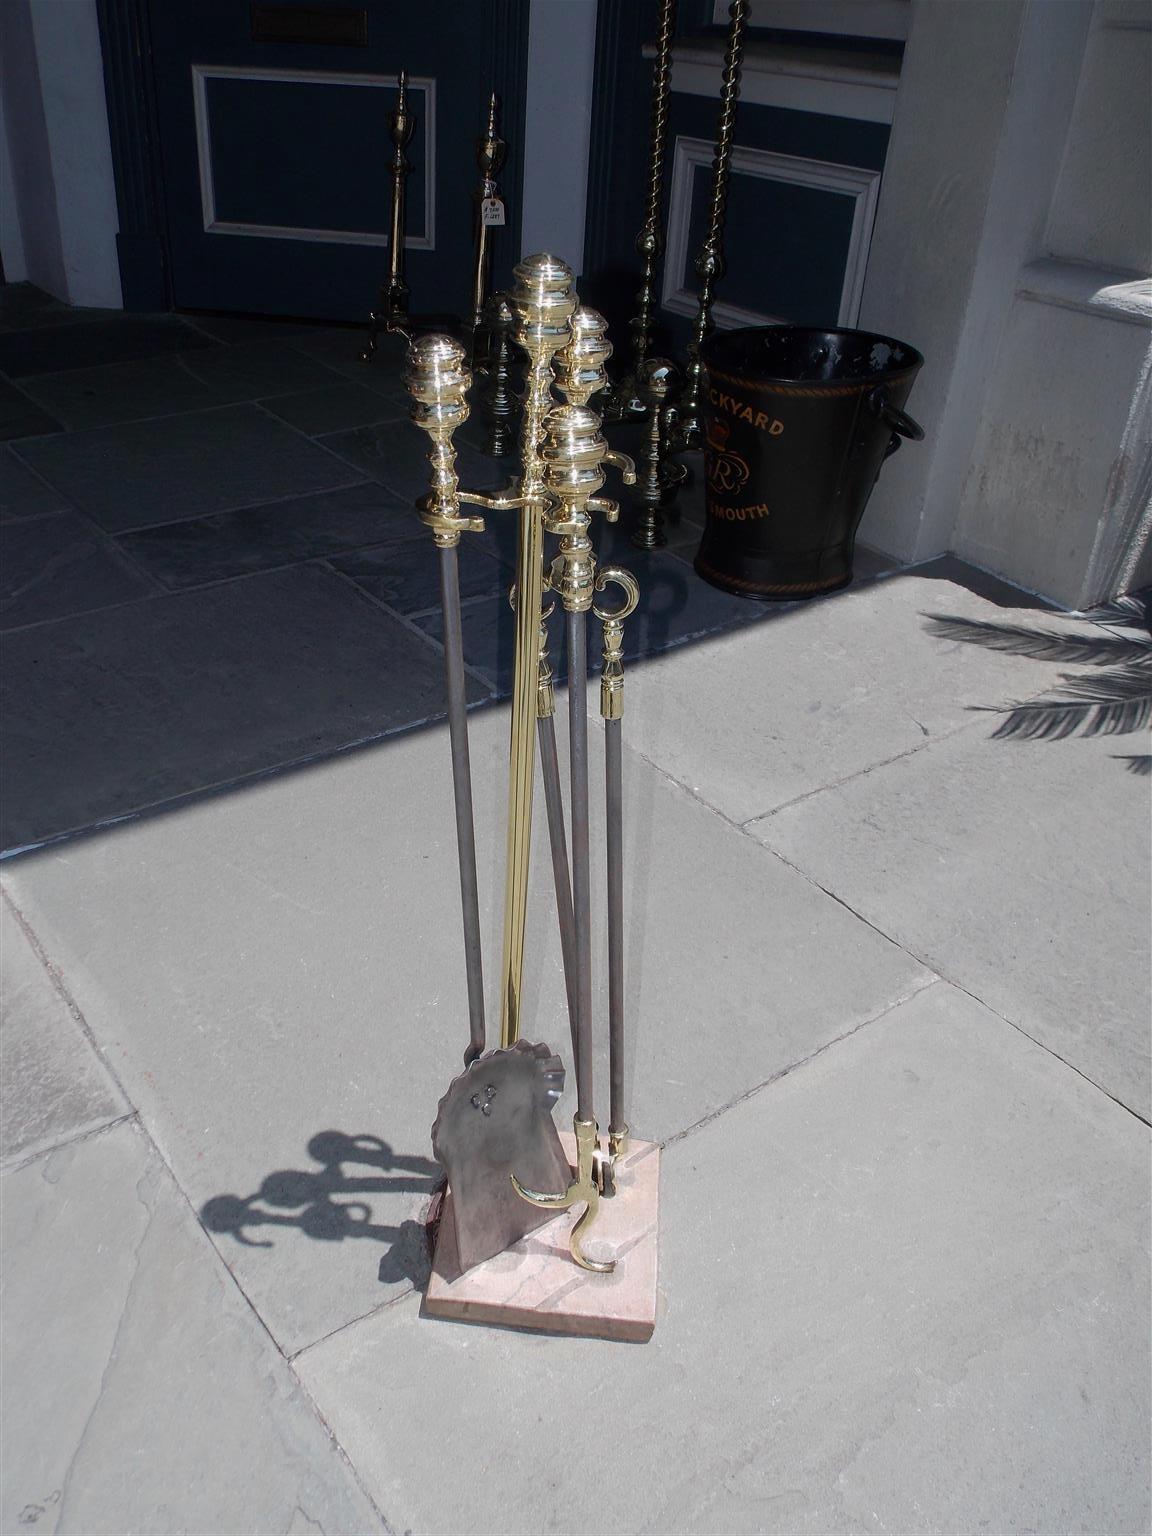 Set of American brass and polished steel fire tools on the original squared marble base stand with round depressions and slotted gouges. Early 19th century, Philadelphia. Stand finial and jamb hook are identical with tool finials and the set consist